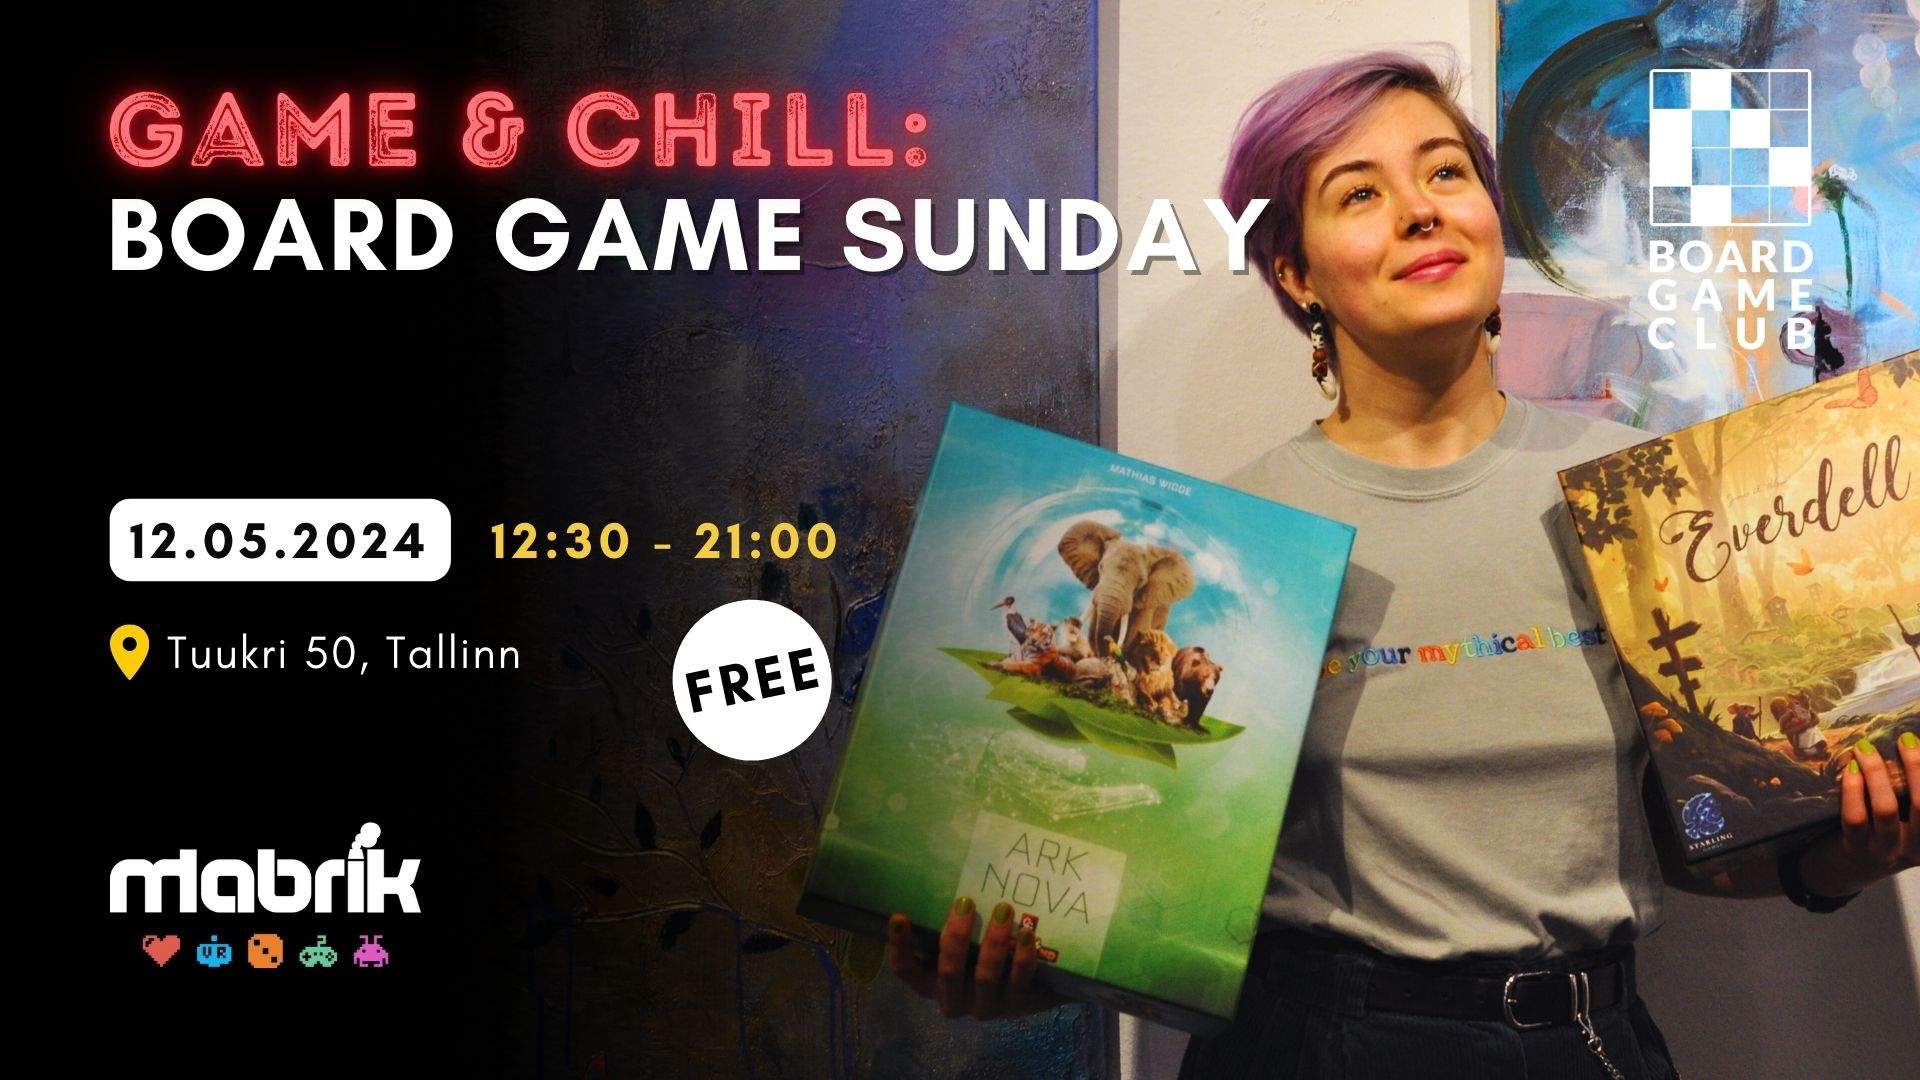 Events - 12.05.2024 - Board Game Sunday